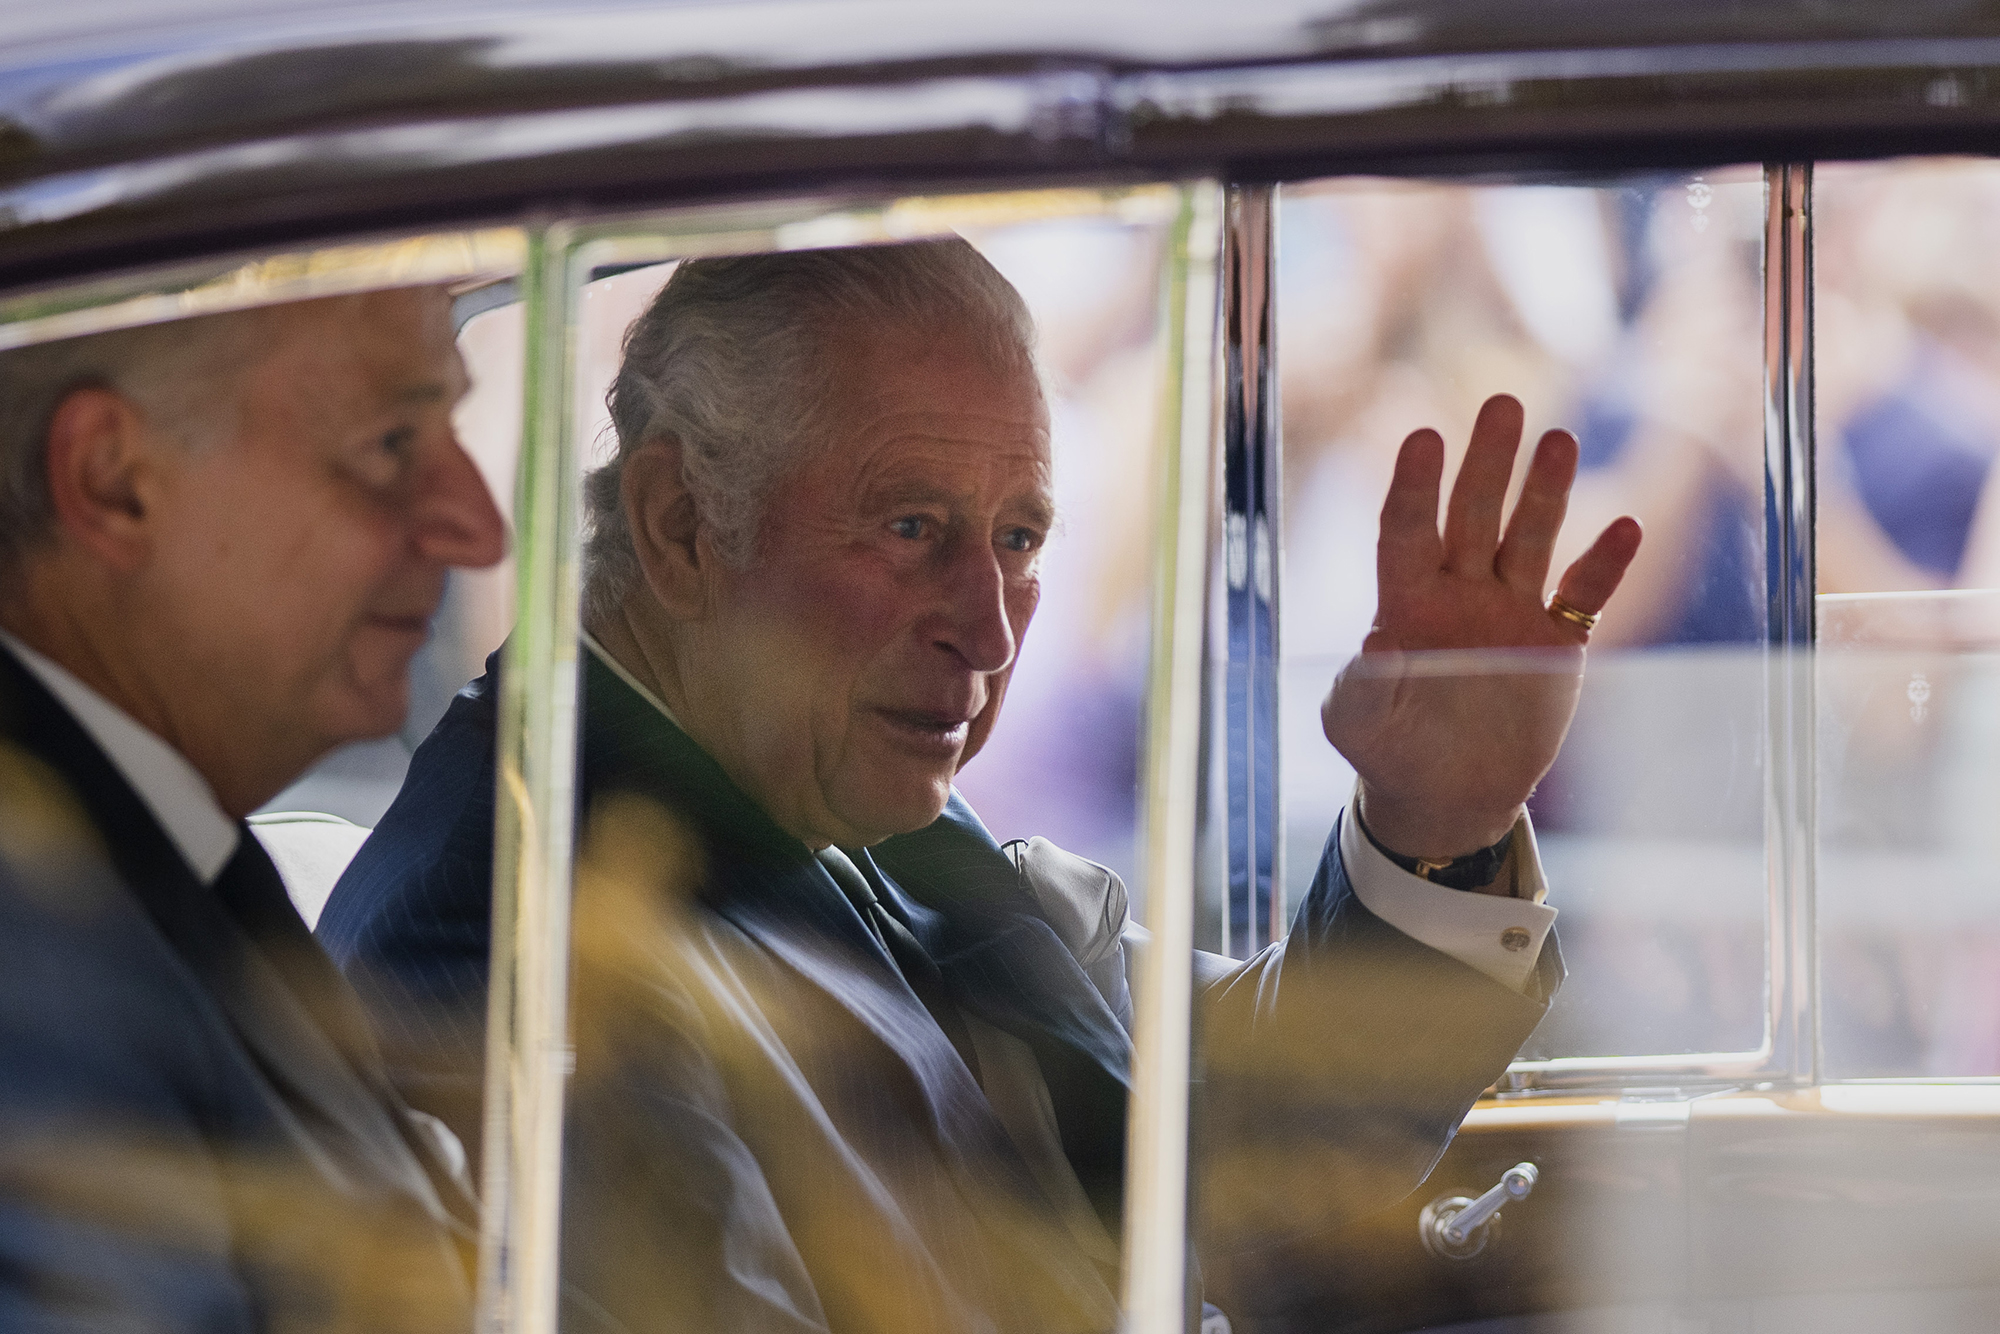 King Charles III greets supporters as he arrives at Buckingham Palace in London, Sunday, September 11, 2022. 